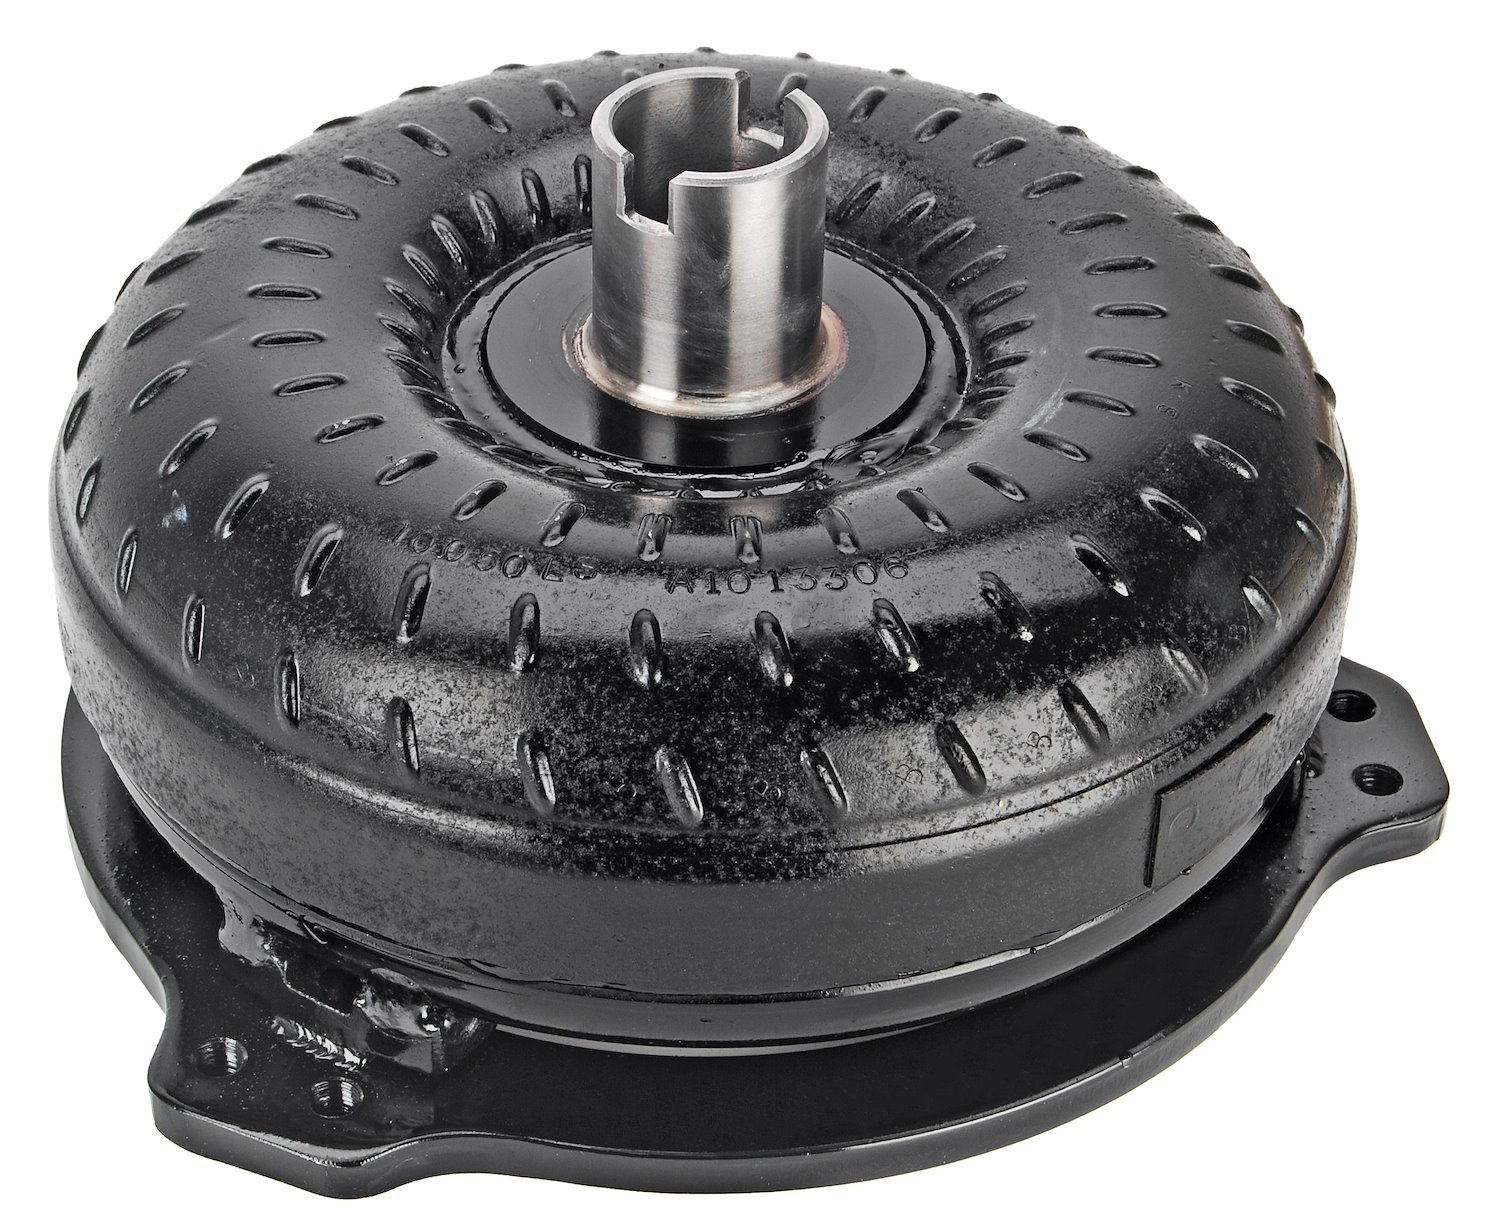 XHD Torque Converter for GM TH700-R4, 4L60 Transmissions [3200-3500 RPM Stall Speed]